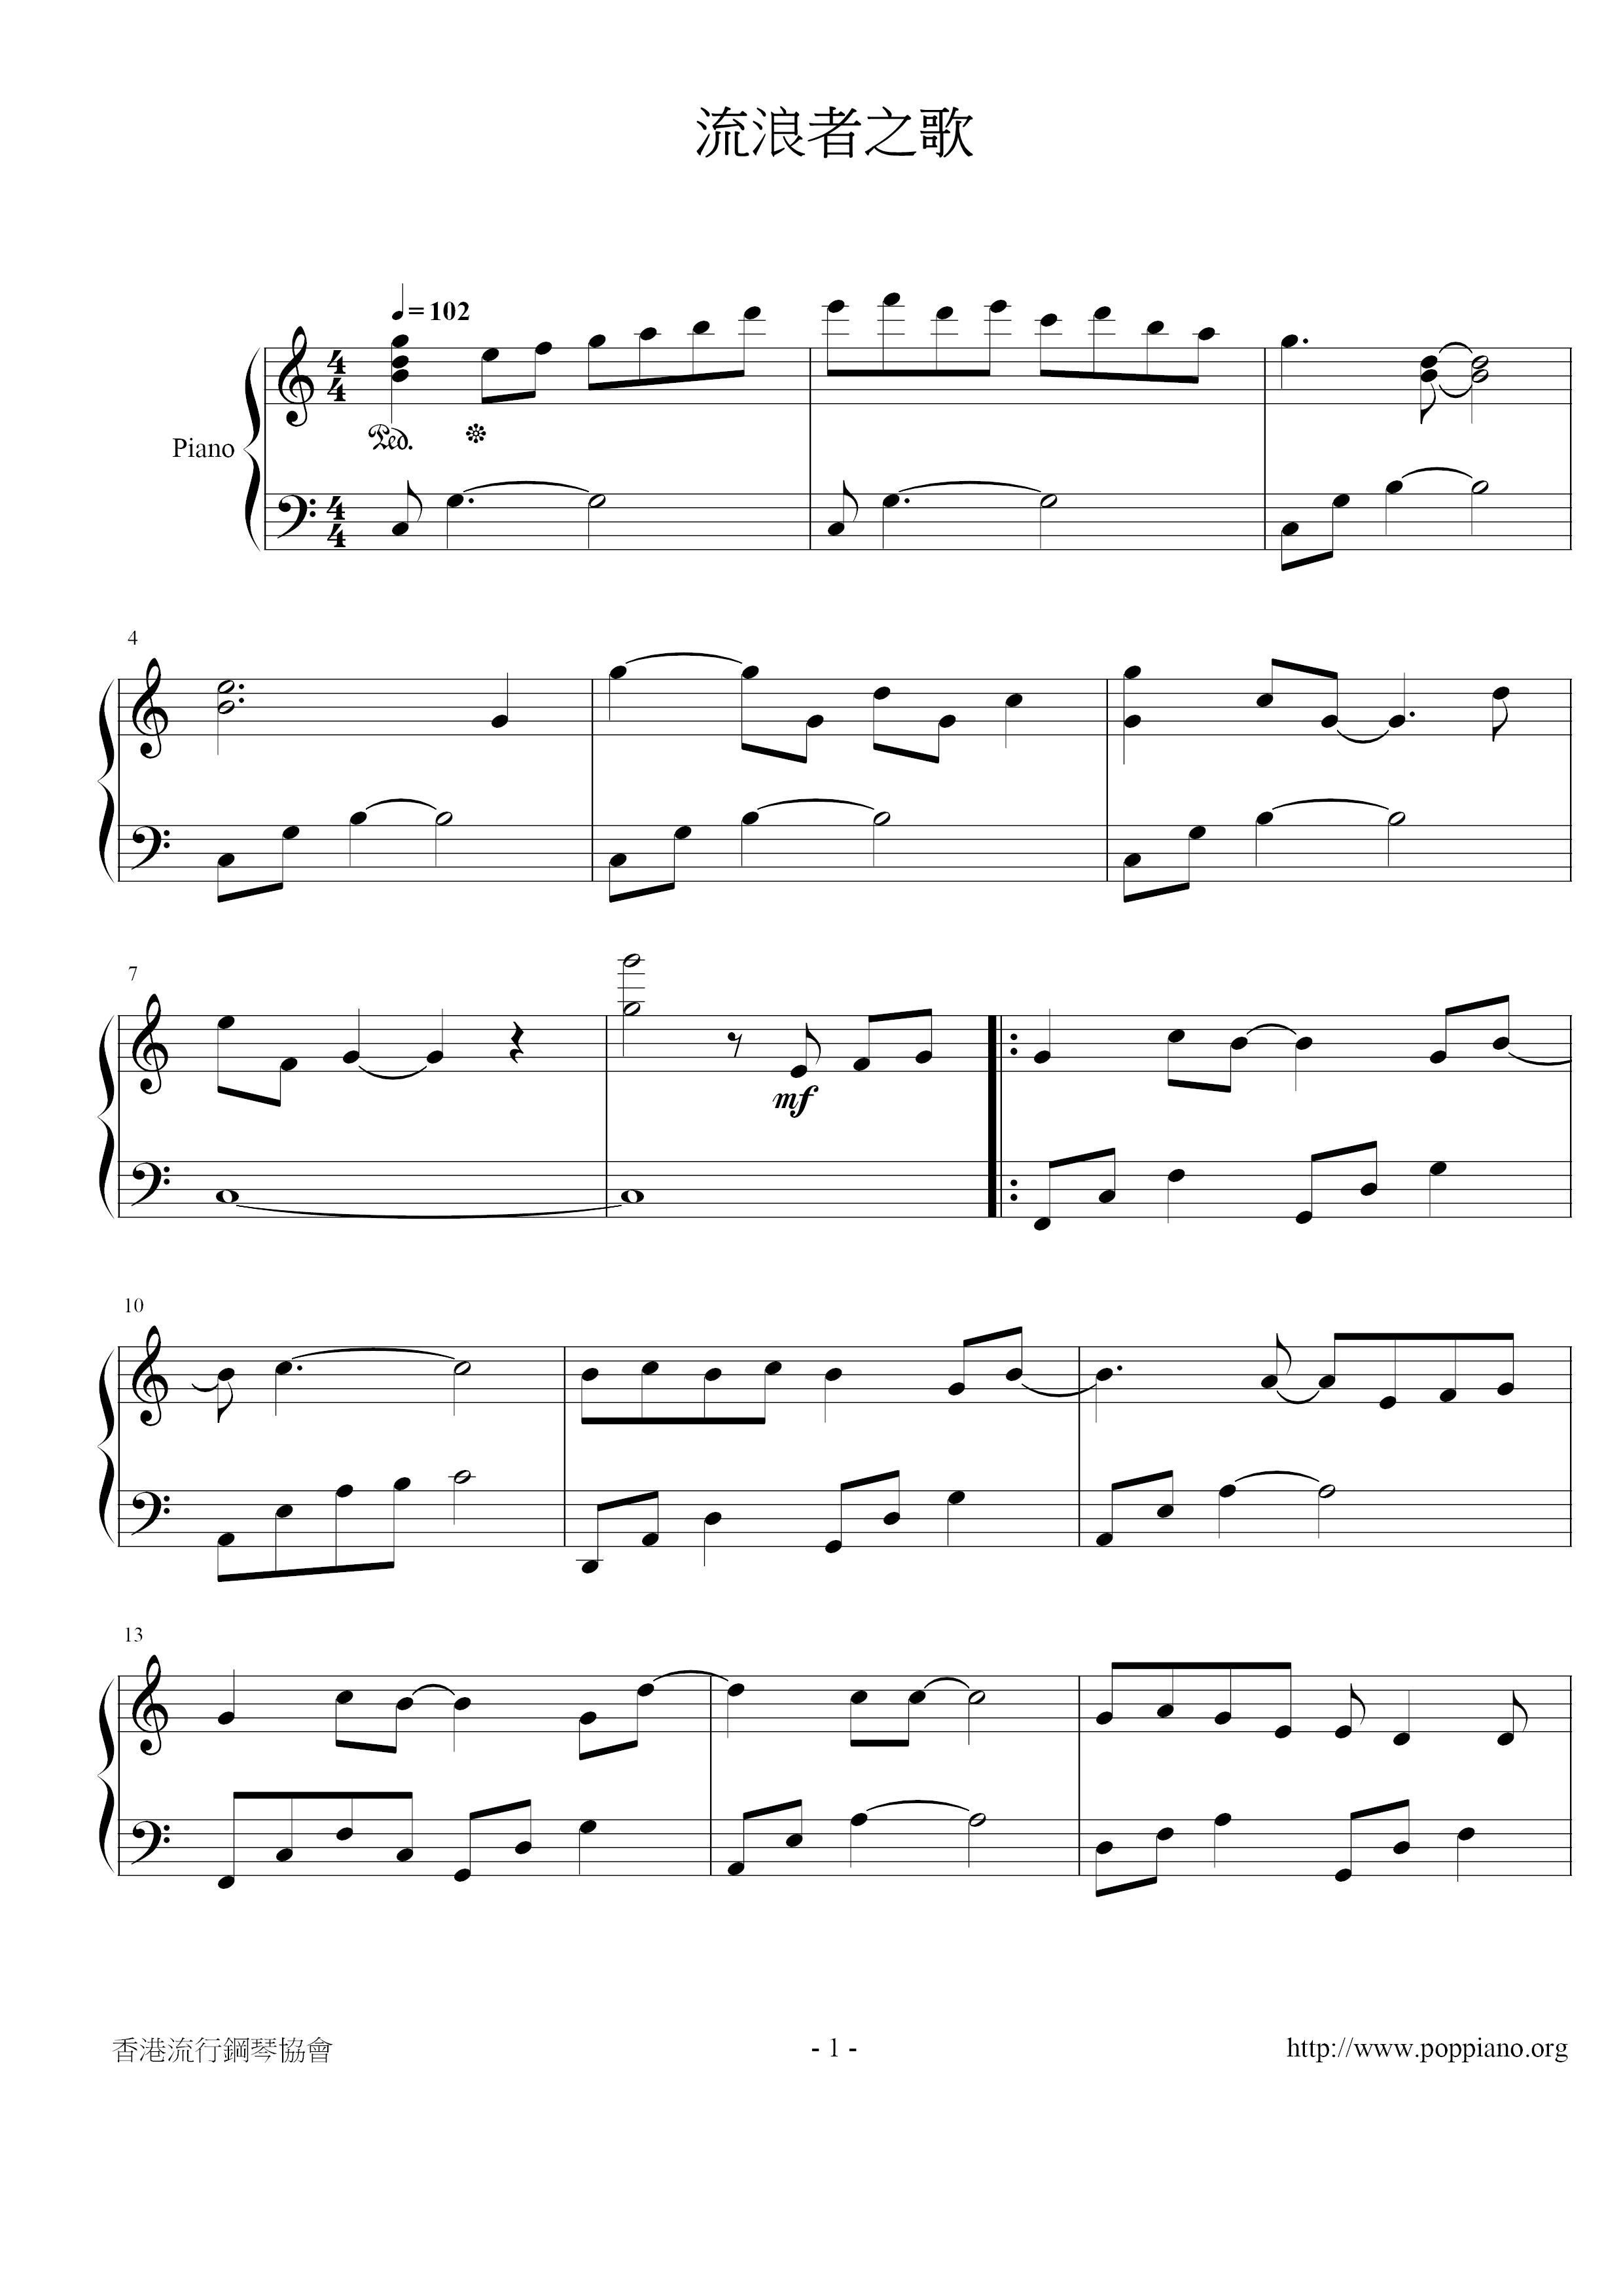 Song Of The Wanderer Score